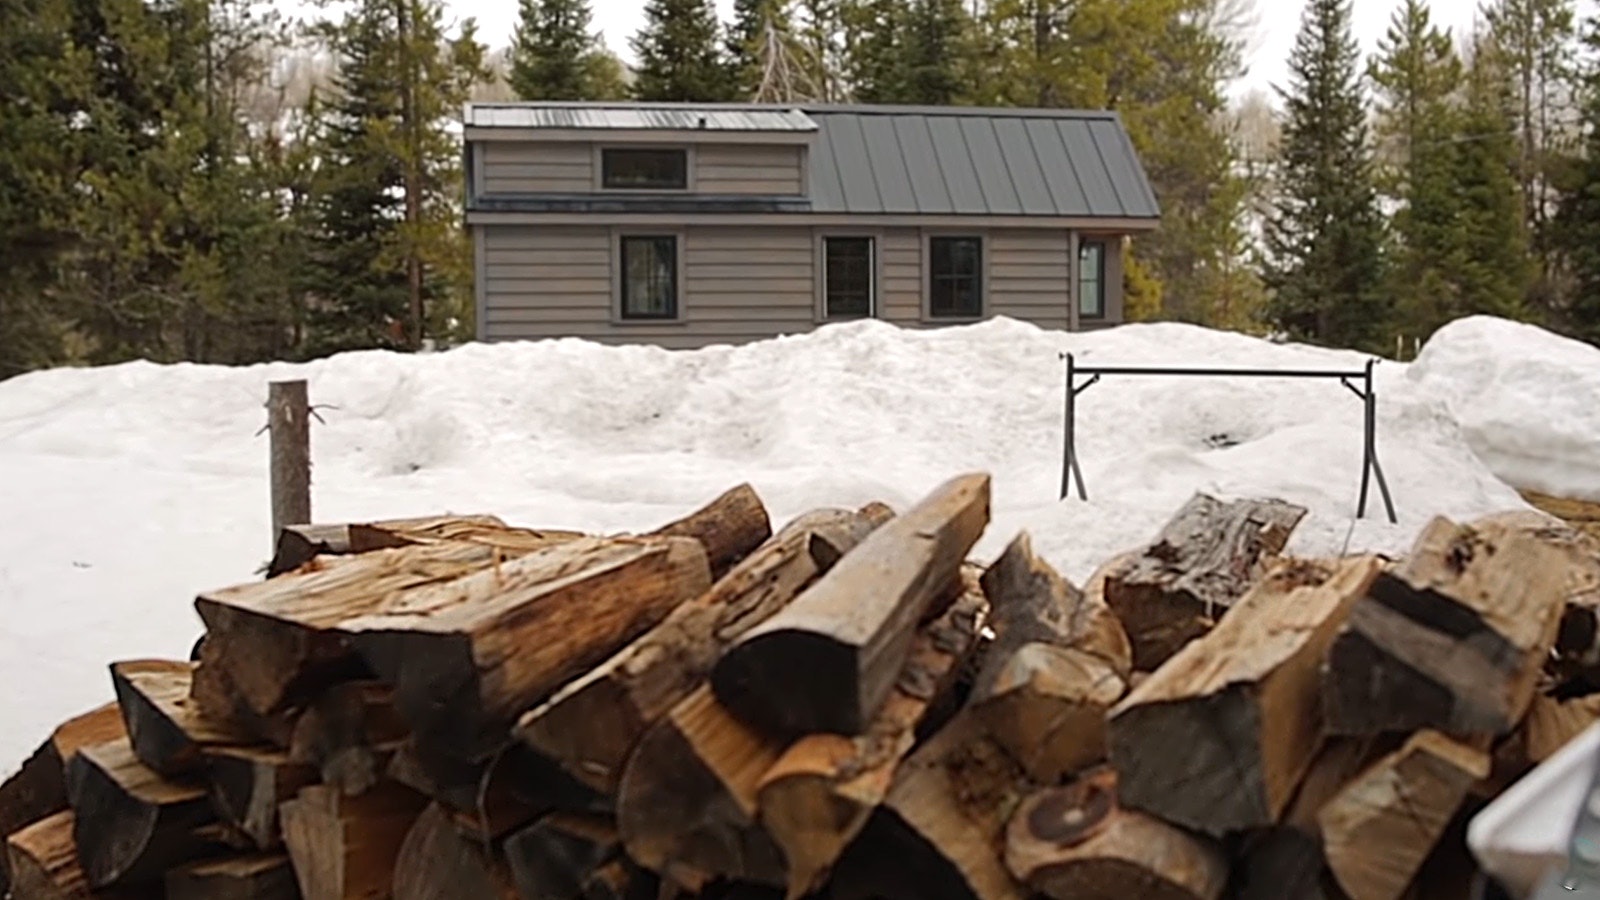 A wood pile helps heat this tiny off-grid home in the northern Wyoming mountains, as featured on the Fy Nyth YouTube channel.